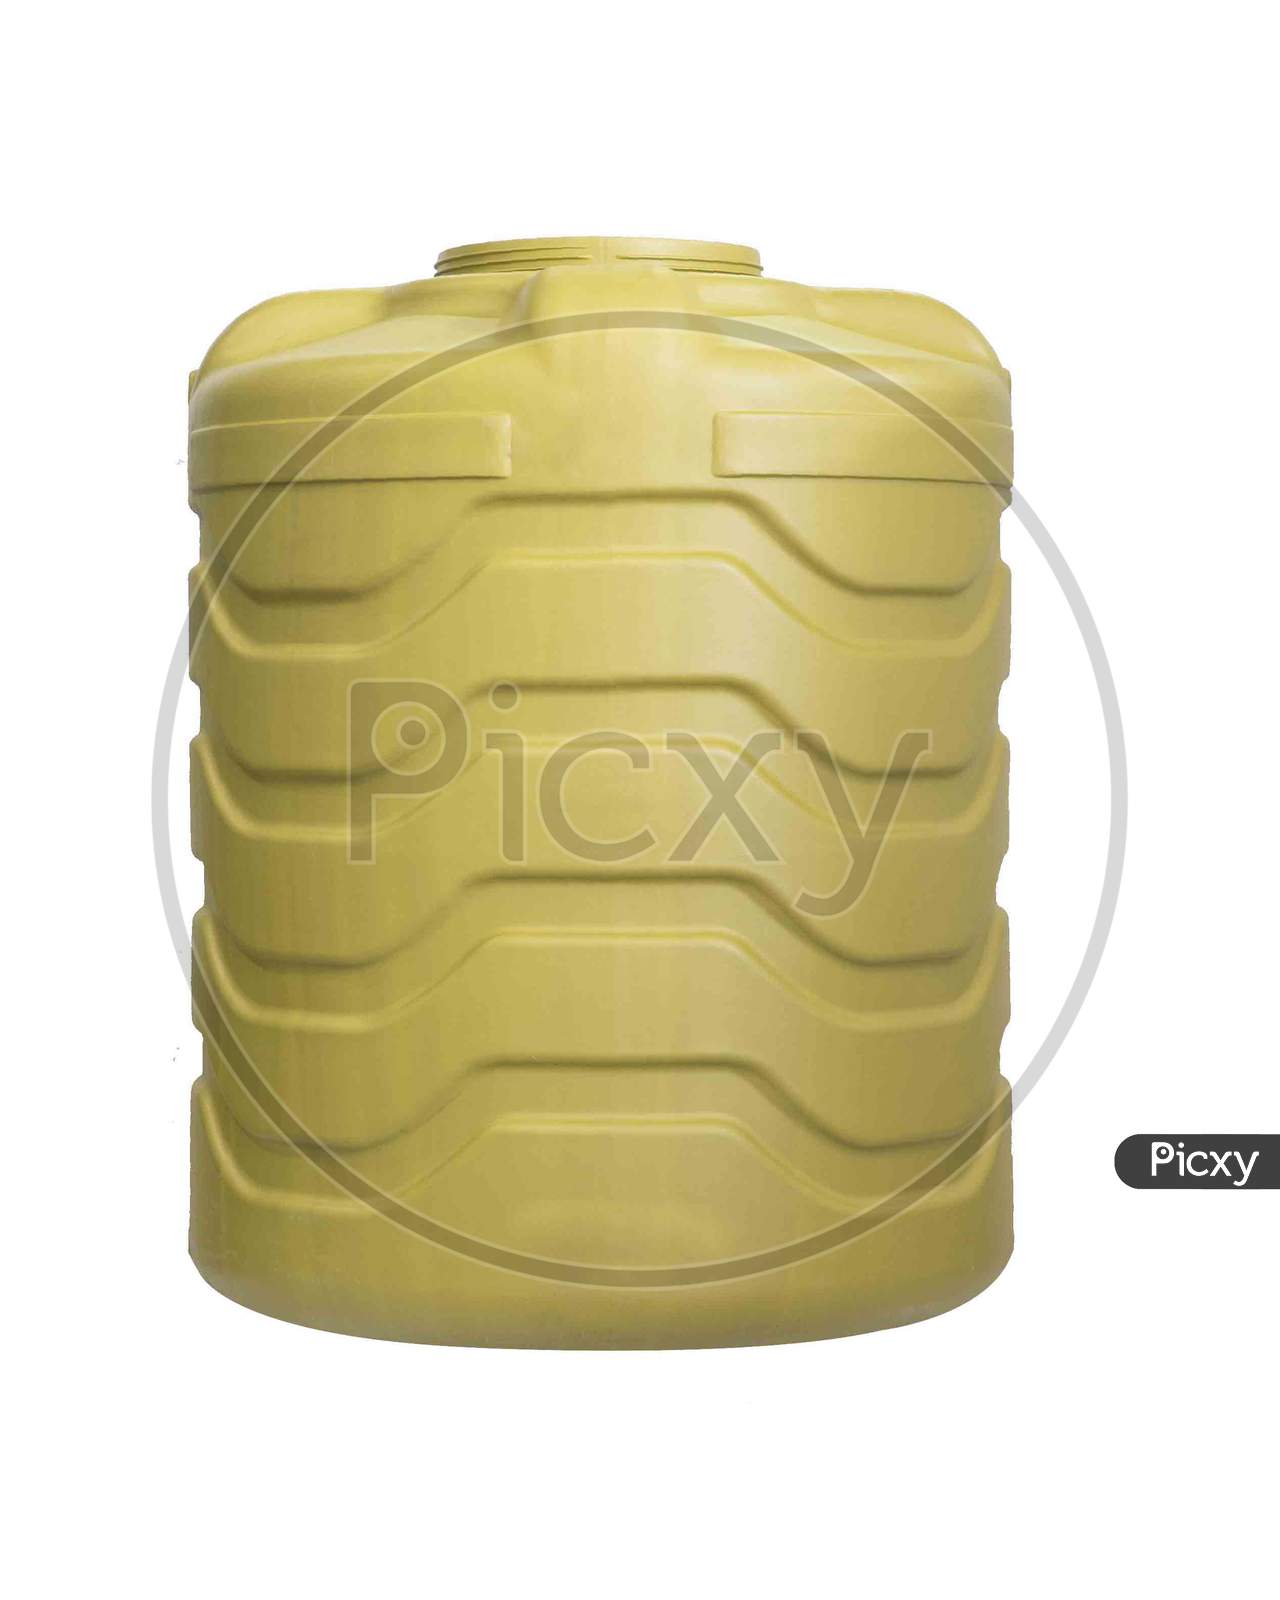 Water tank in white background